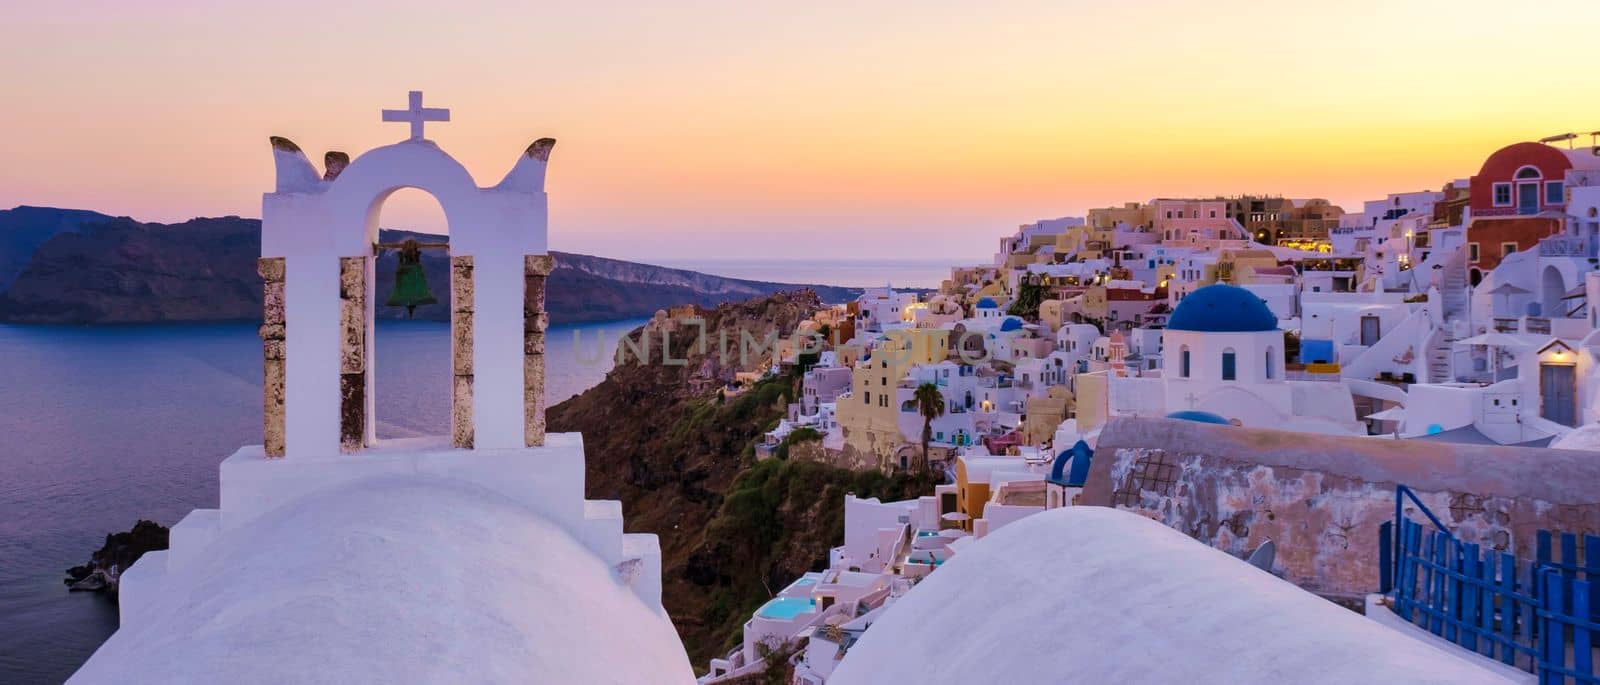 Sunset at the Greek village of Oia Santorini Greece with a view over the ocean caldera of Santorini